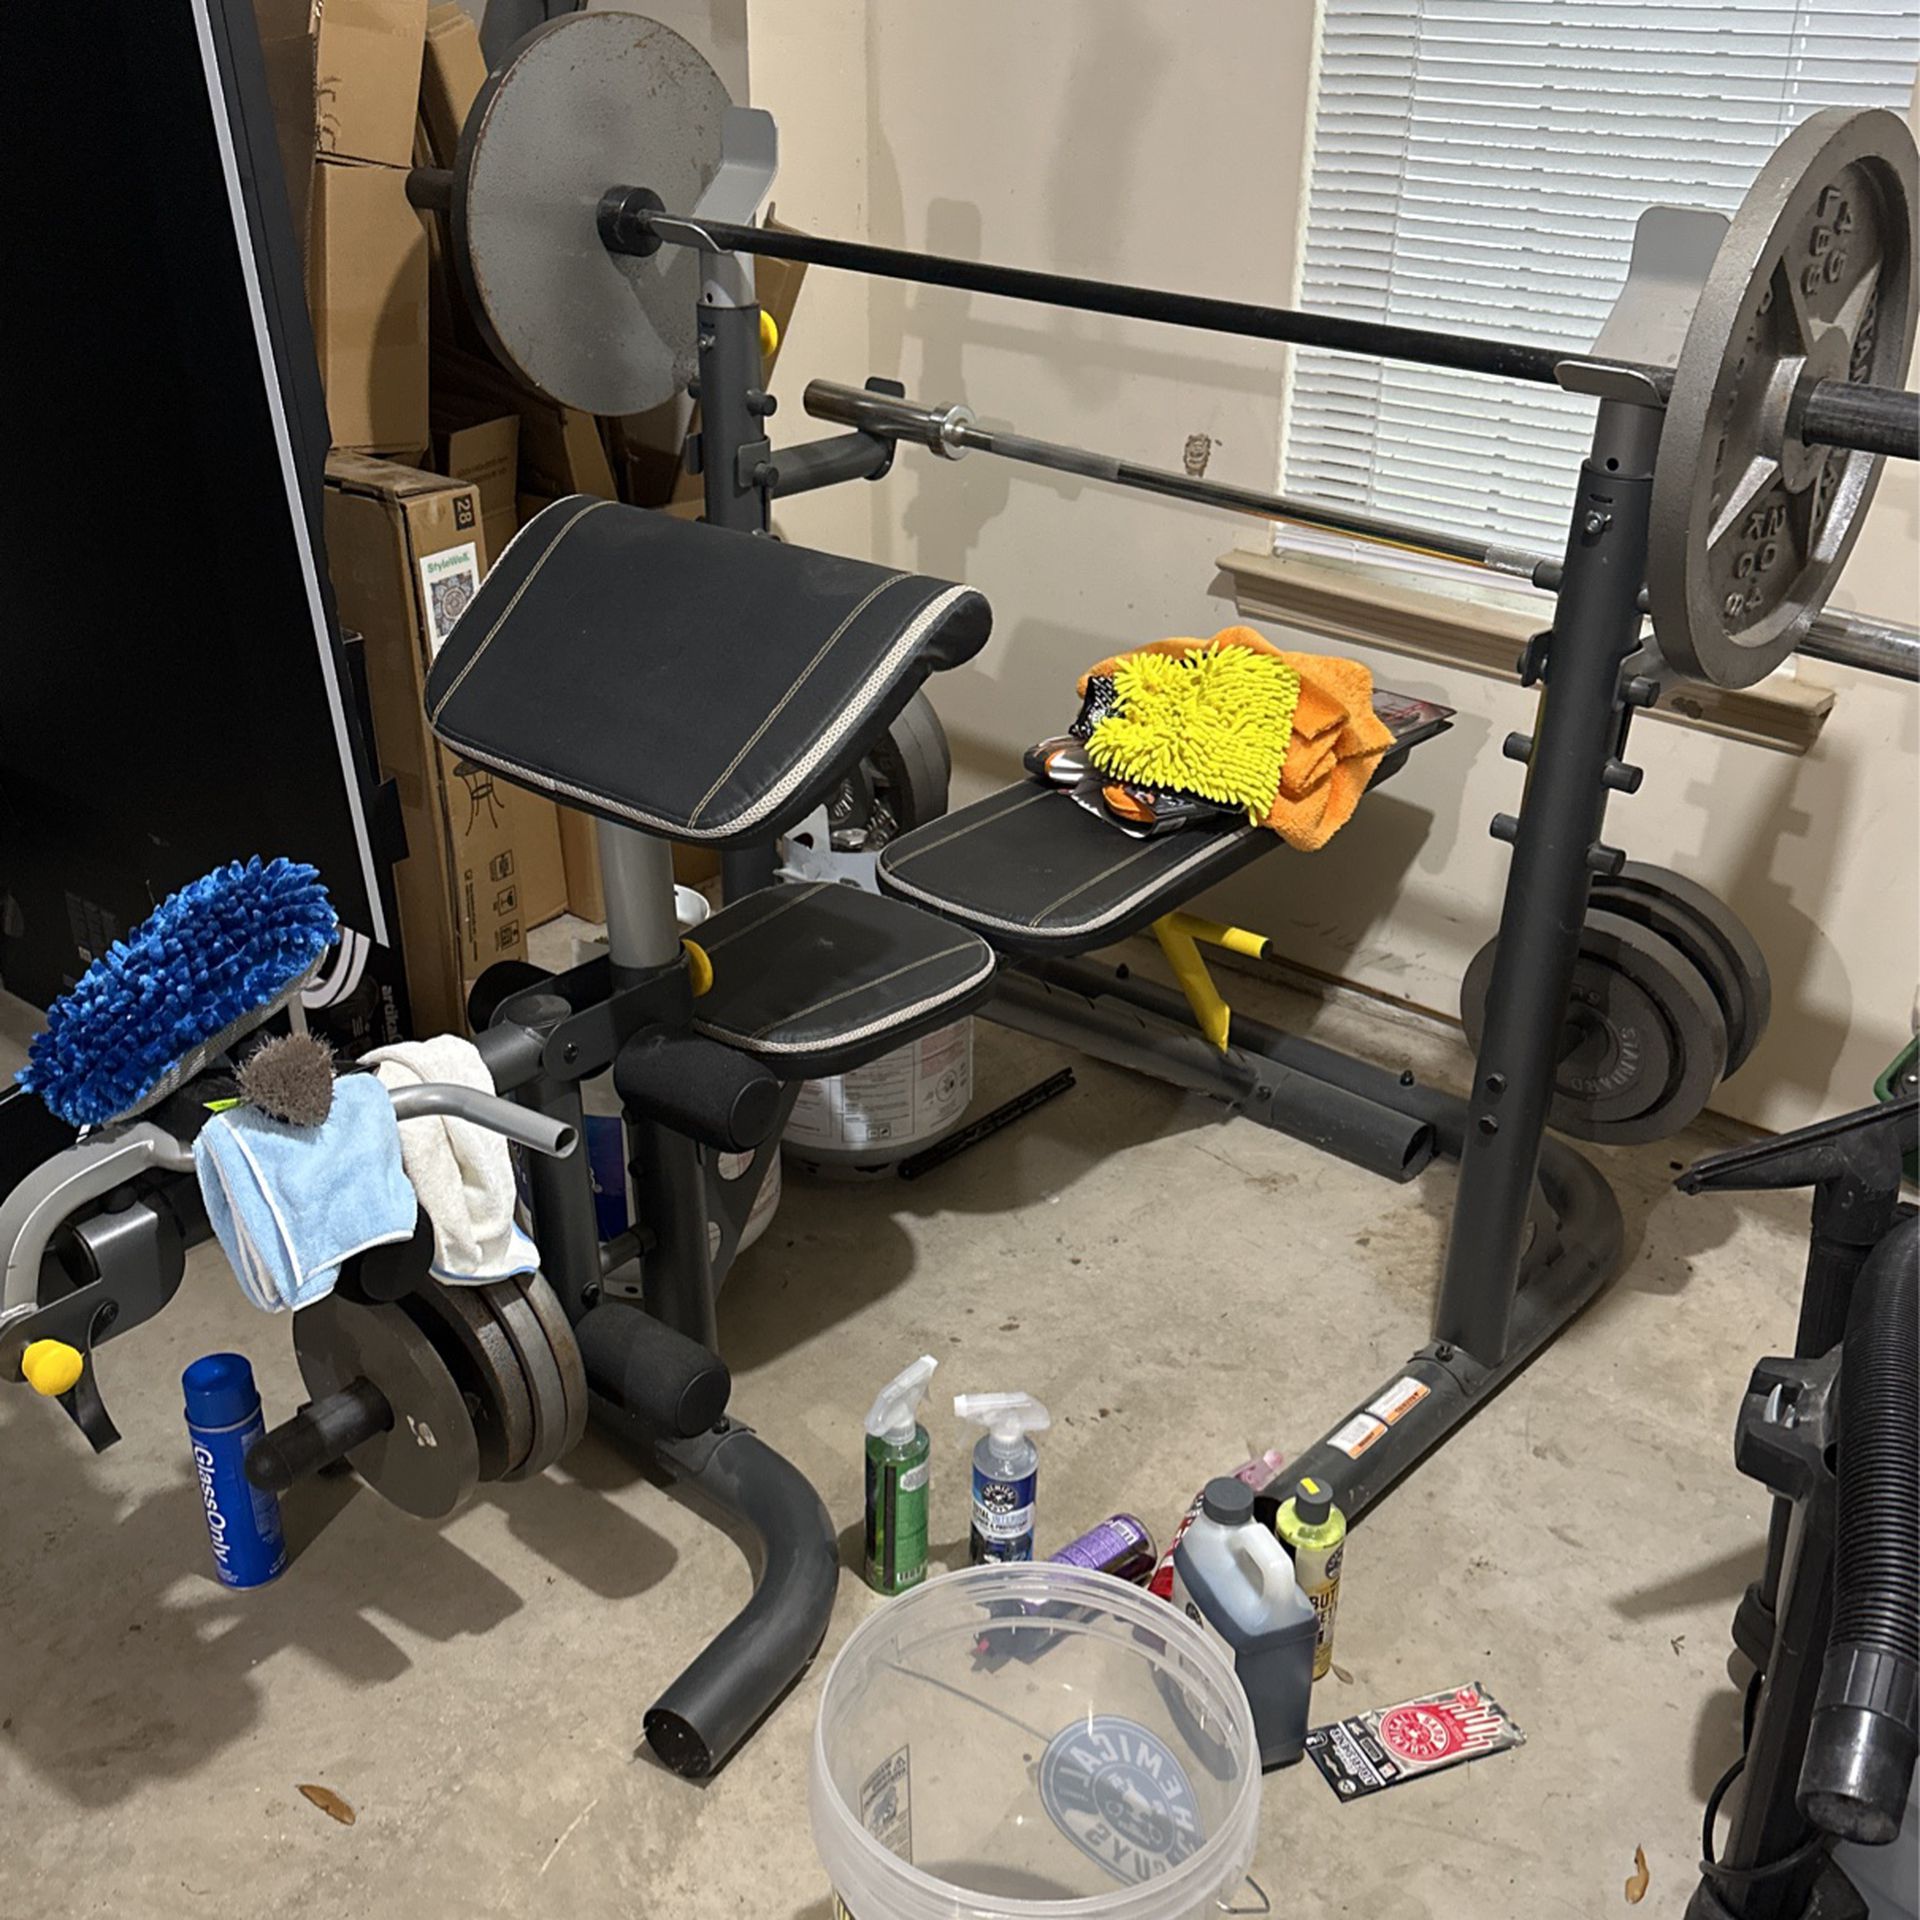 Weight Bench And Weights